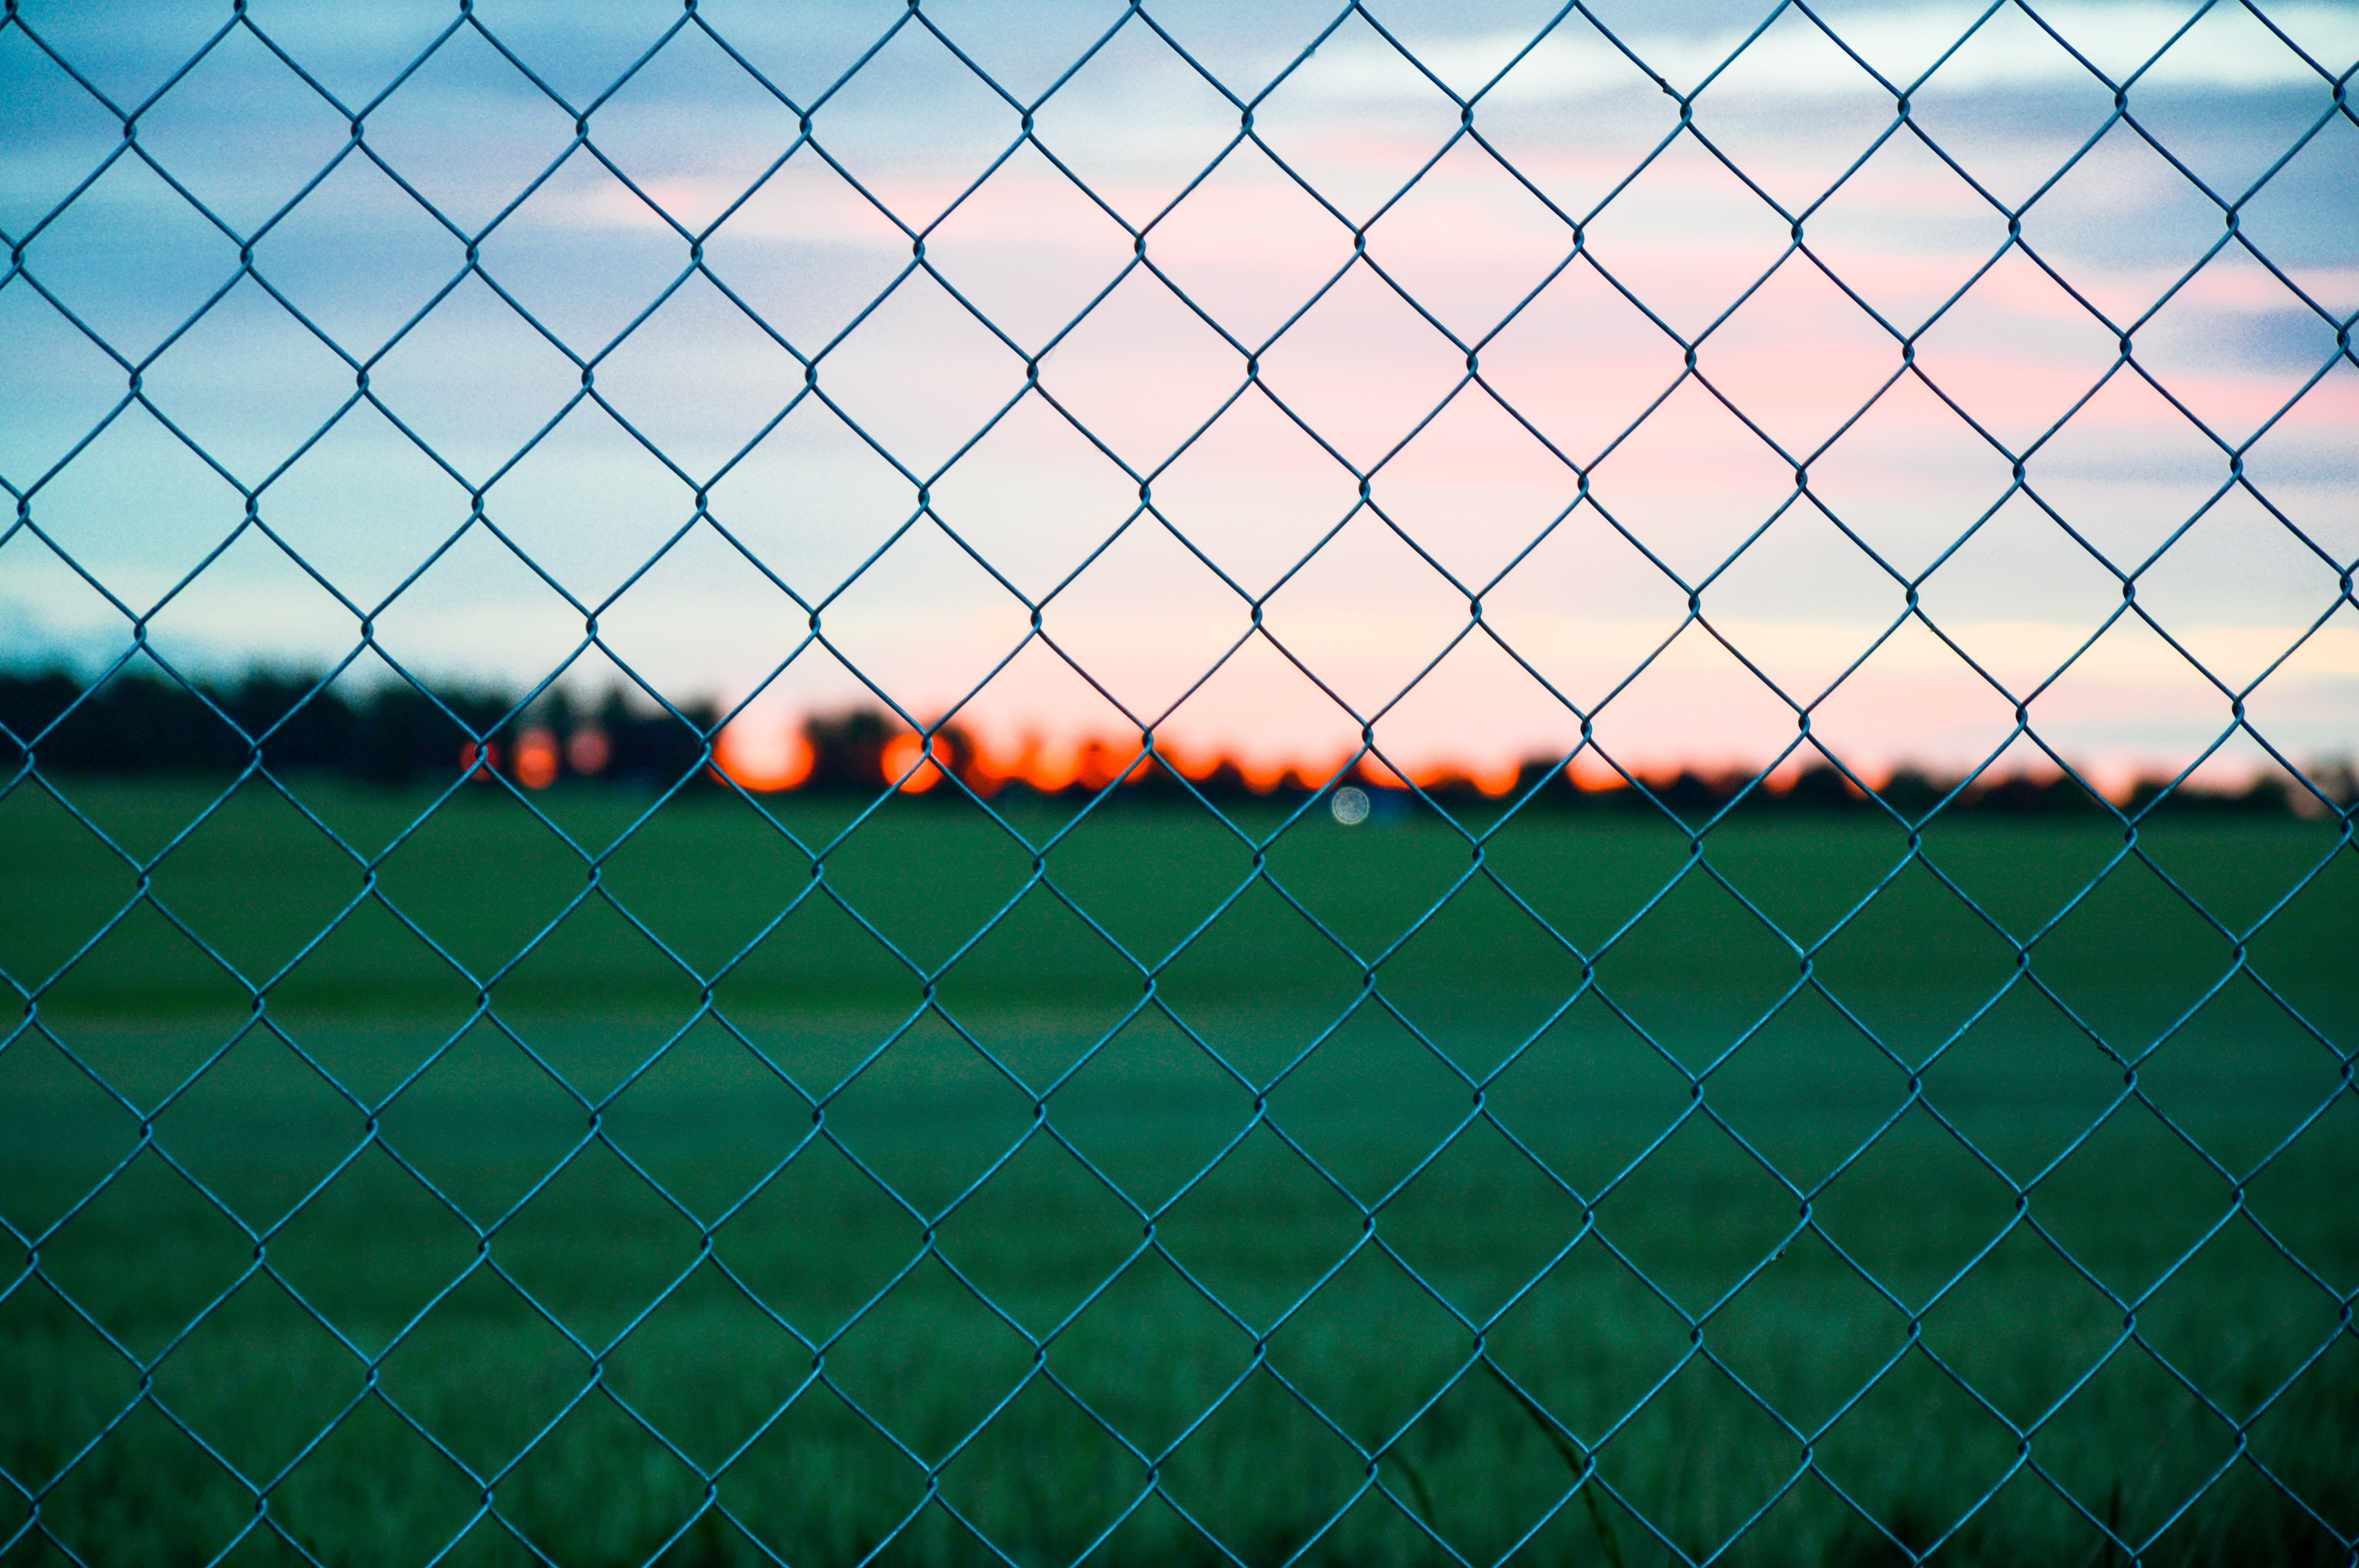 focus photography of chain link fence